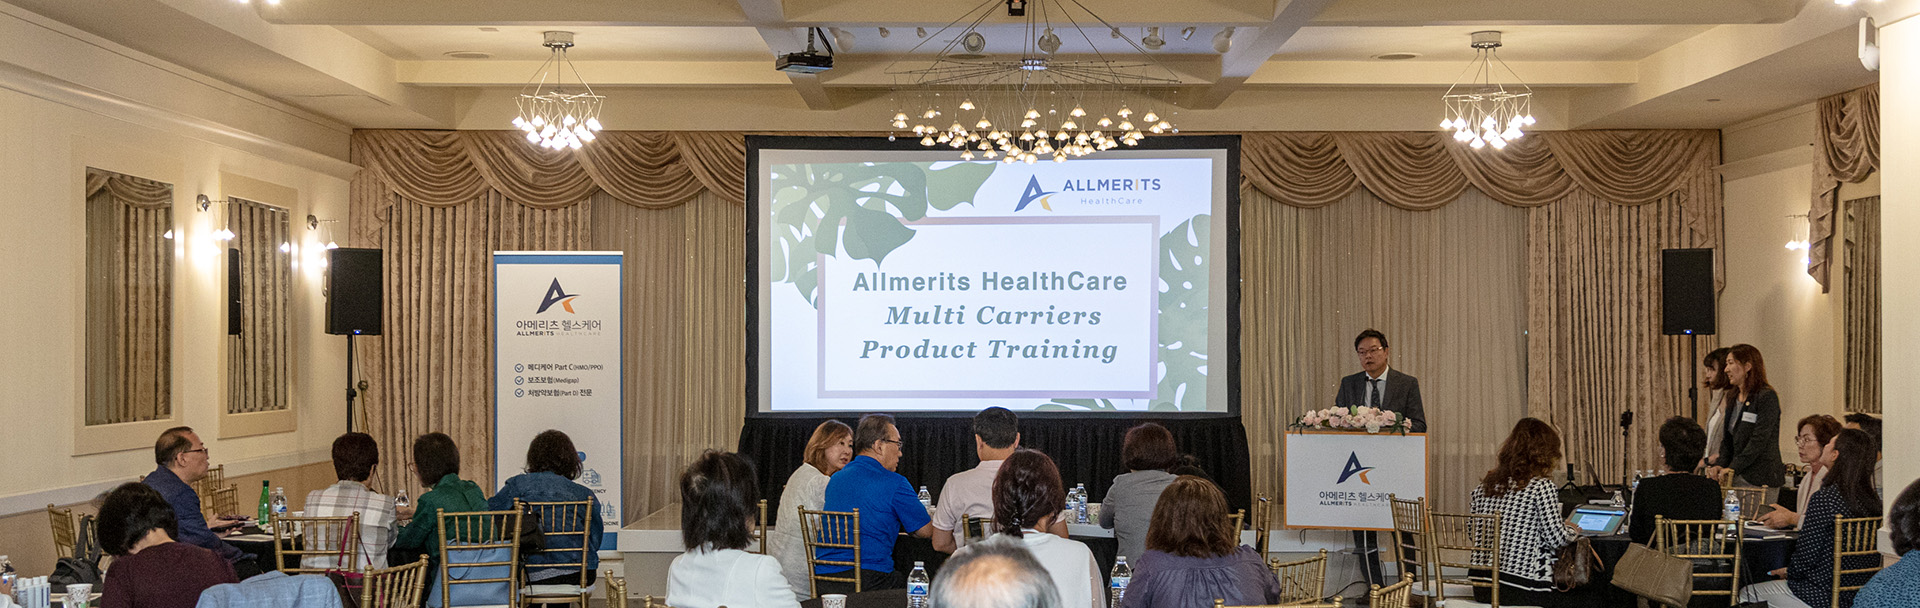 Allmerits HealthCare Multi Carriers Product Training